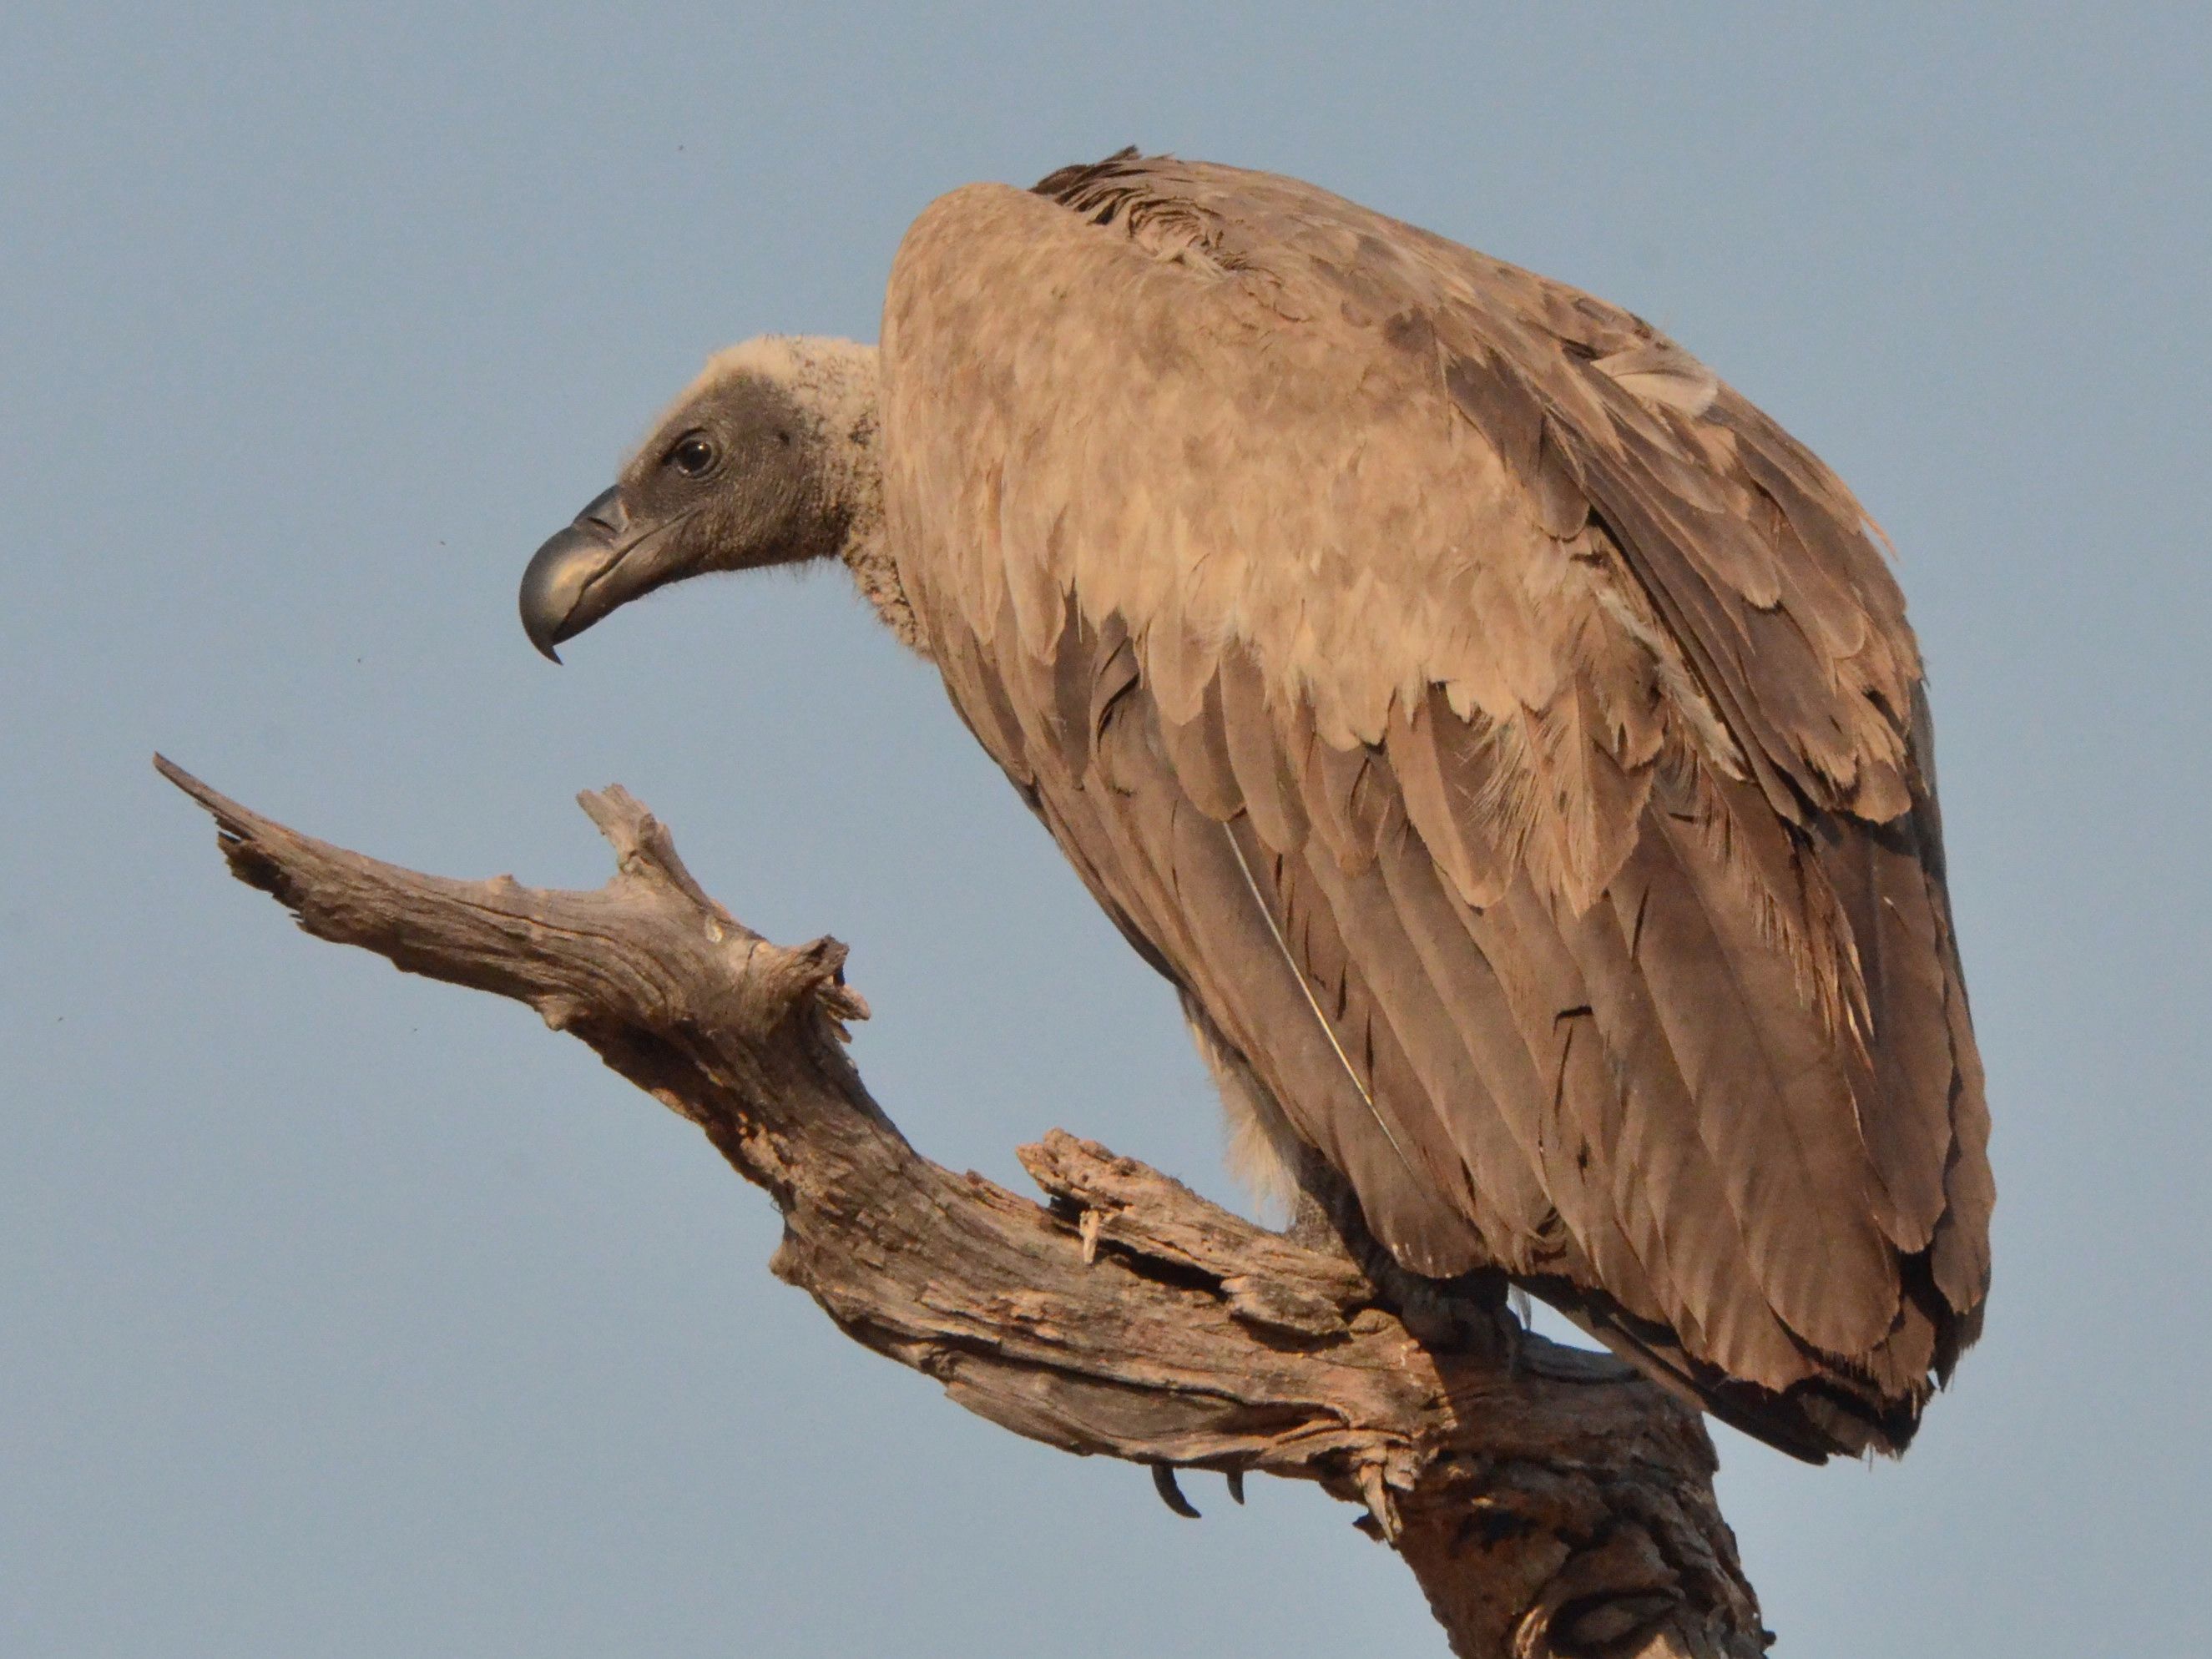 Click picture to see more White-backed Vultures.